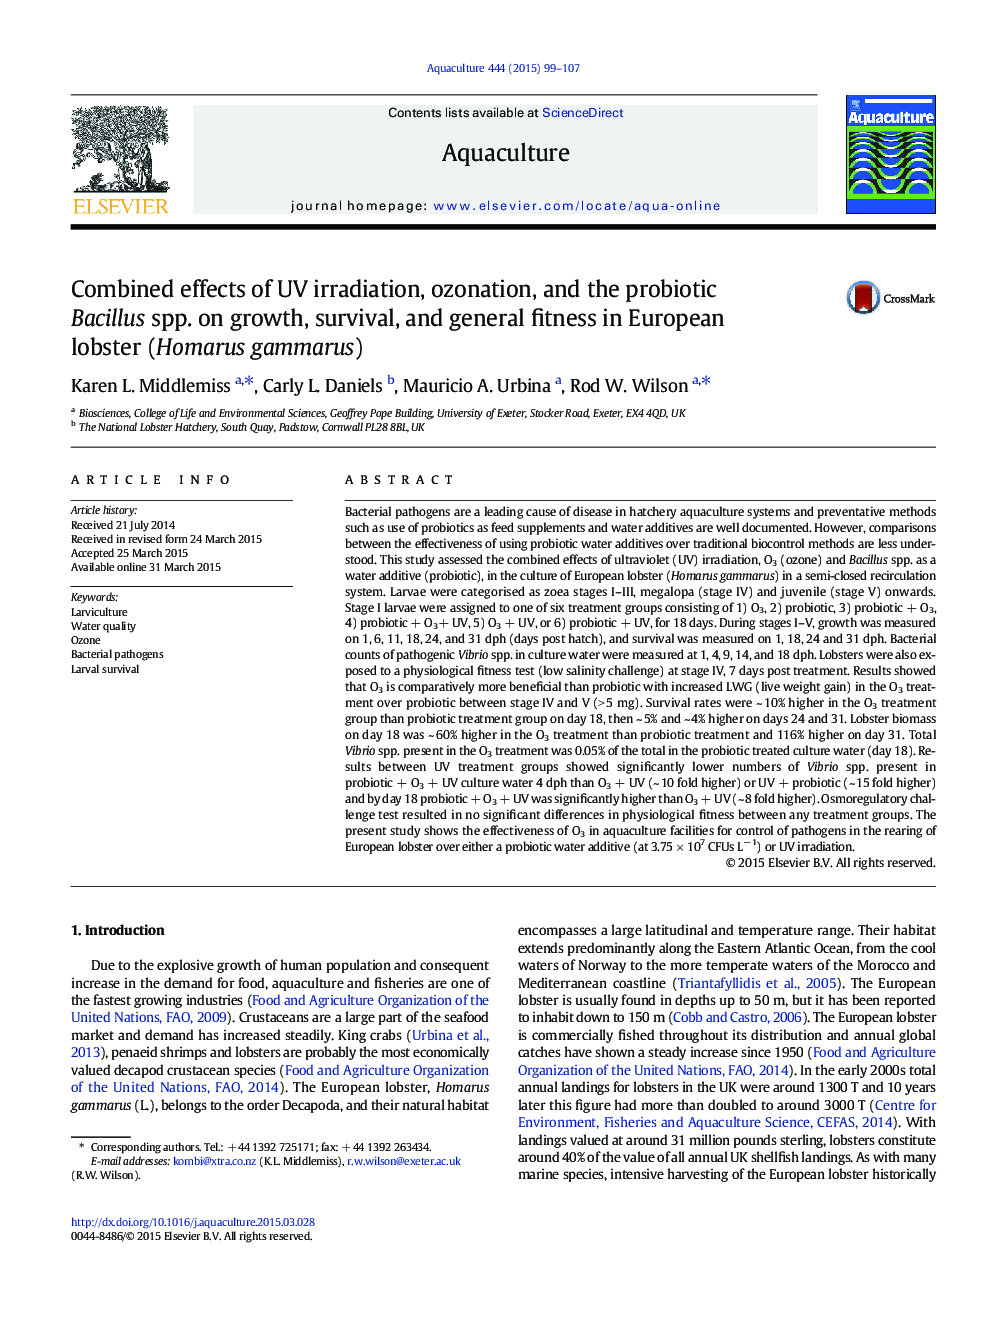 Combined effects of UV irradiation, ozonation, and the probiotic Bacillus spp. on growth, survival, and general fitness in European lobster (Homarus gammarus)